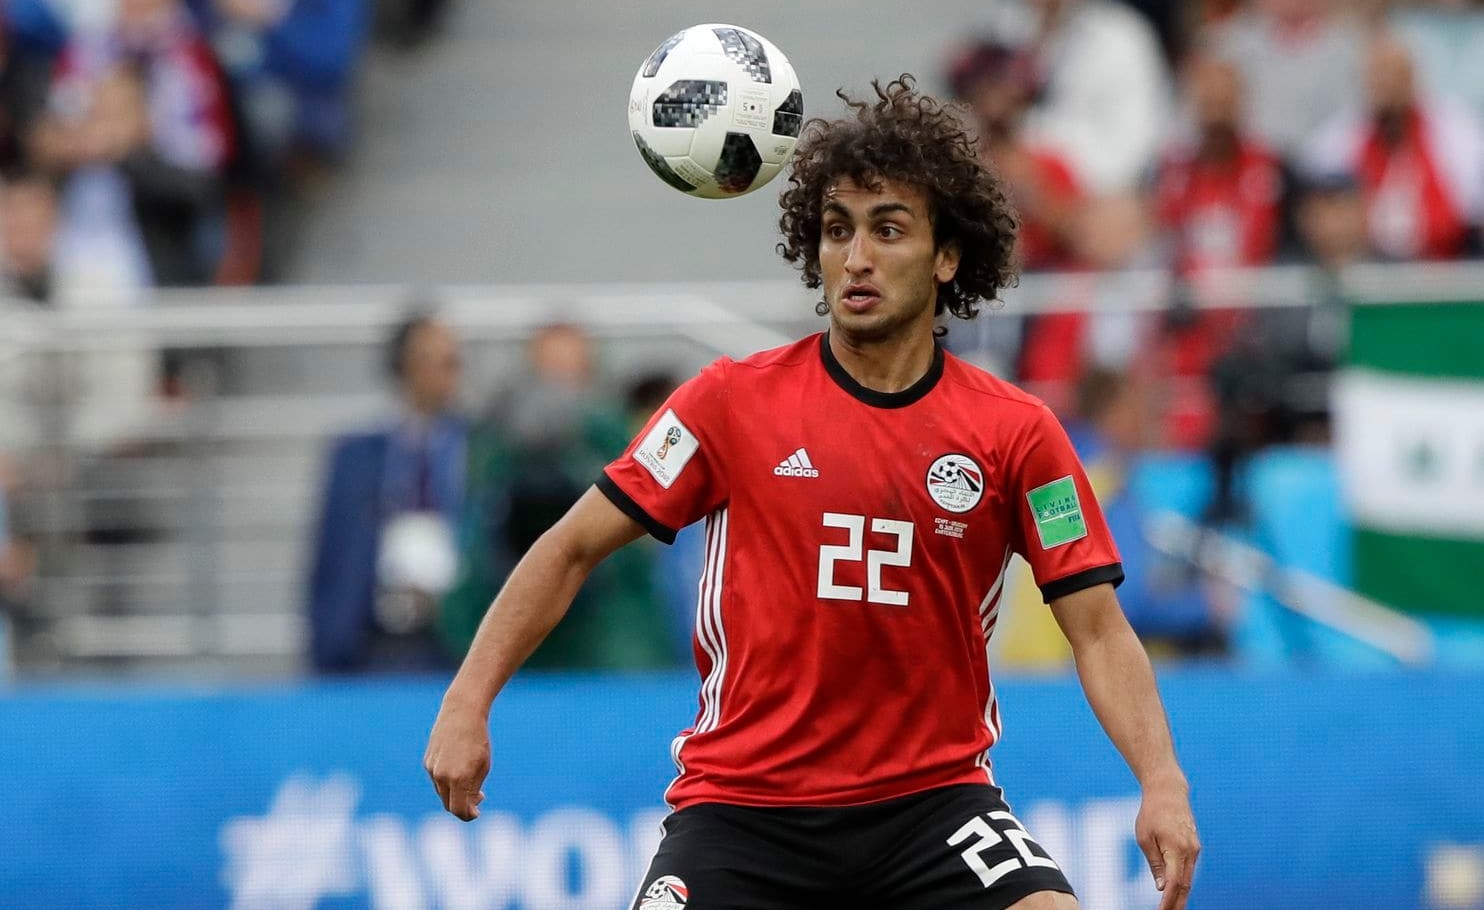 Egyptian Footballer Amr Warda Banished From National Team Over Sexual Harassment Scandals